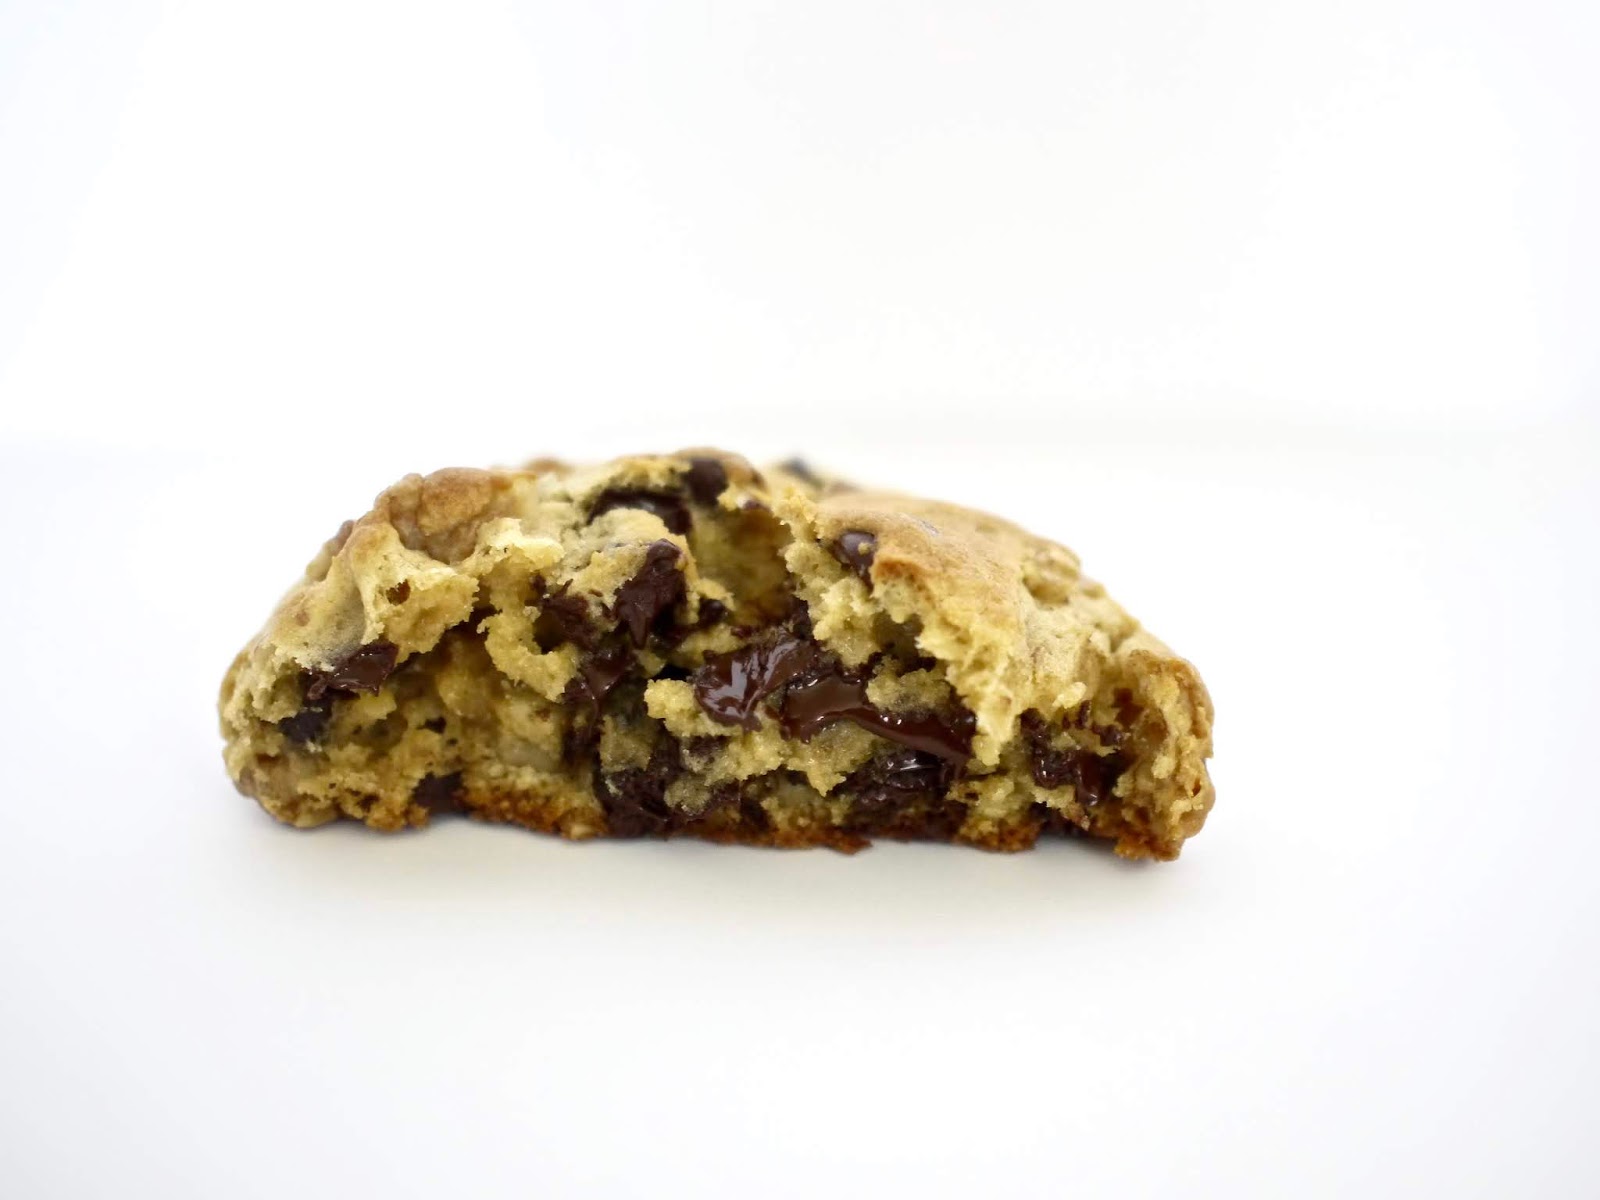 How to Test Any Kind of Cookie for Doneness